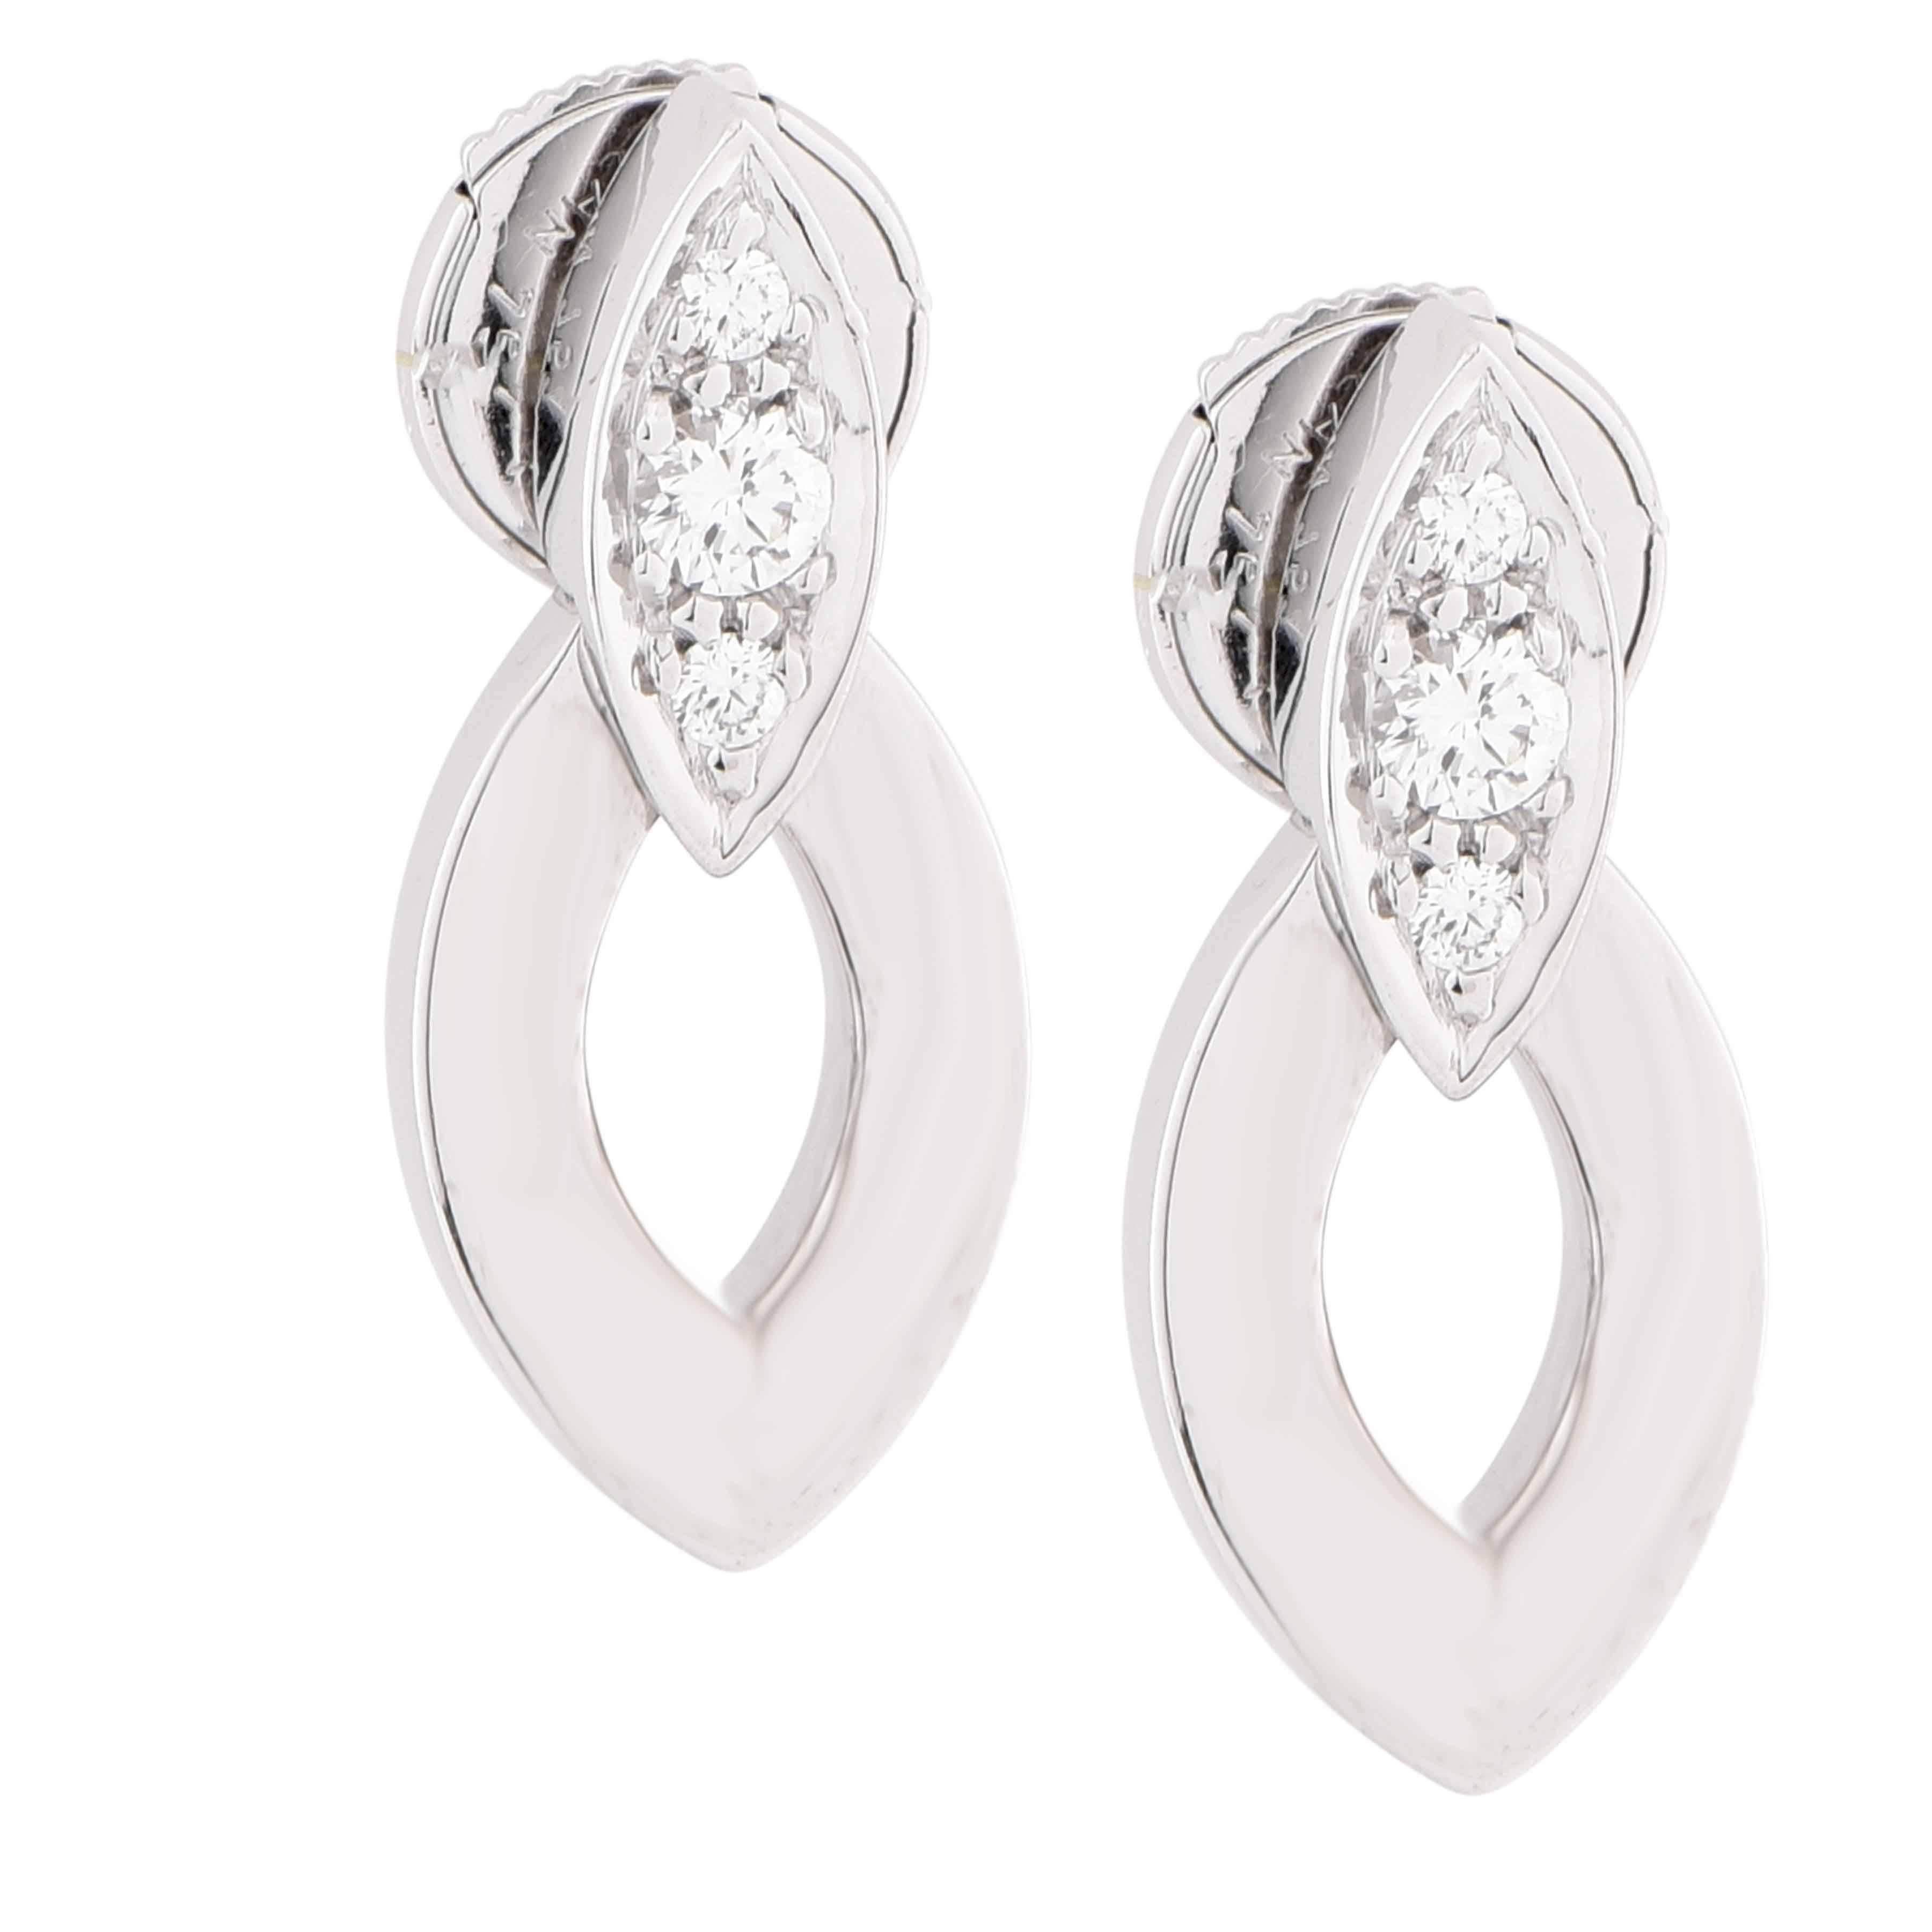 Cartier Diadea Diamond Gold Earrings In Excellent Condition For Sale In Bay Harbor Islands, FL